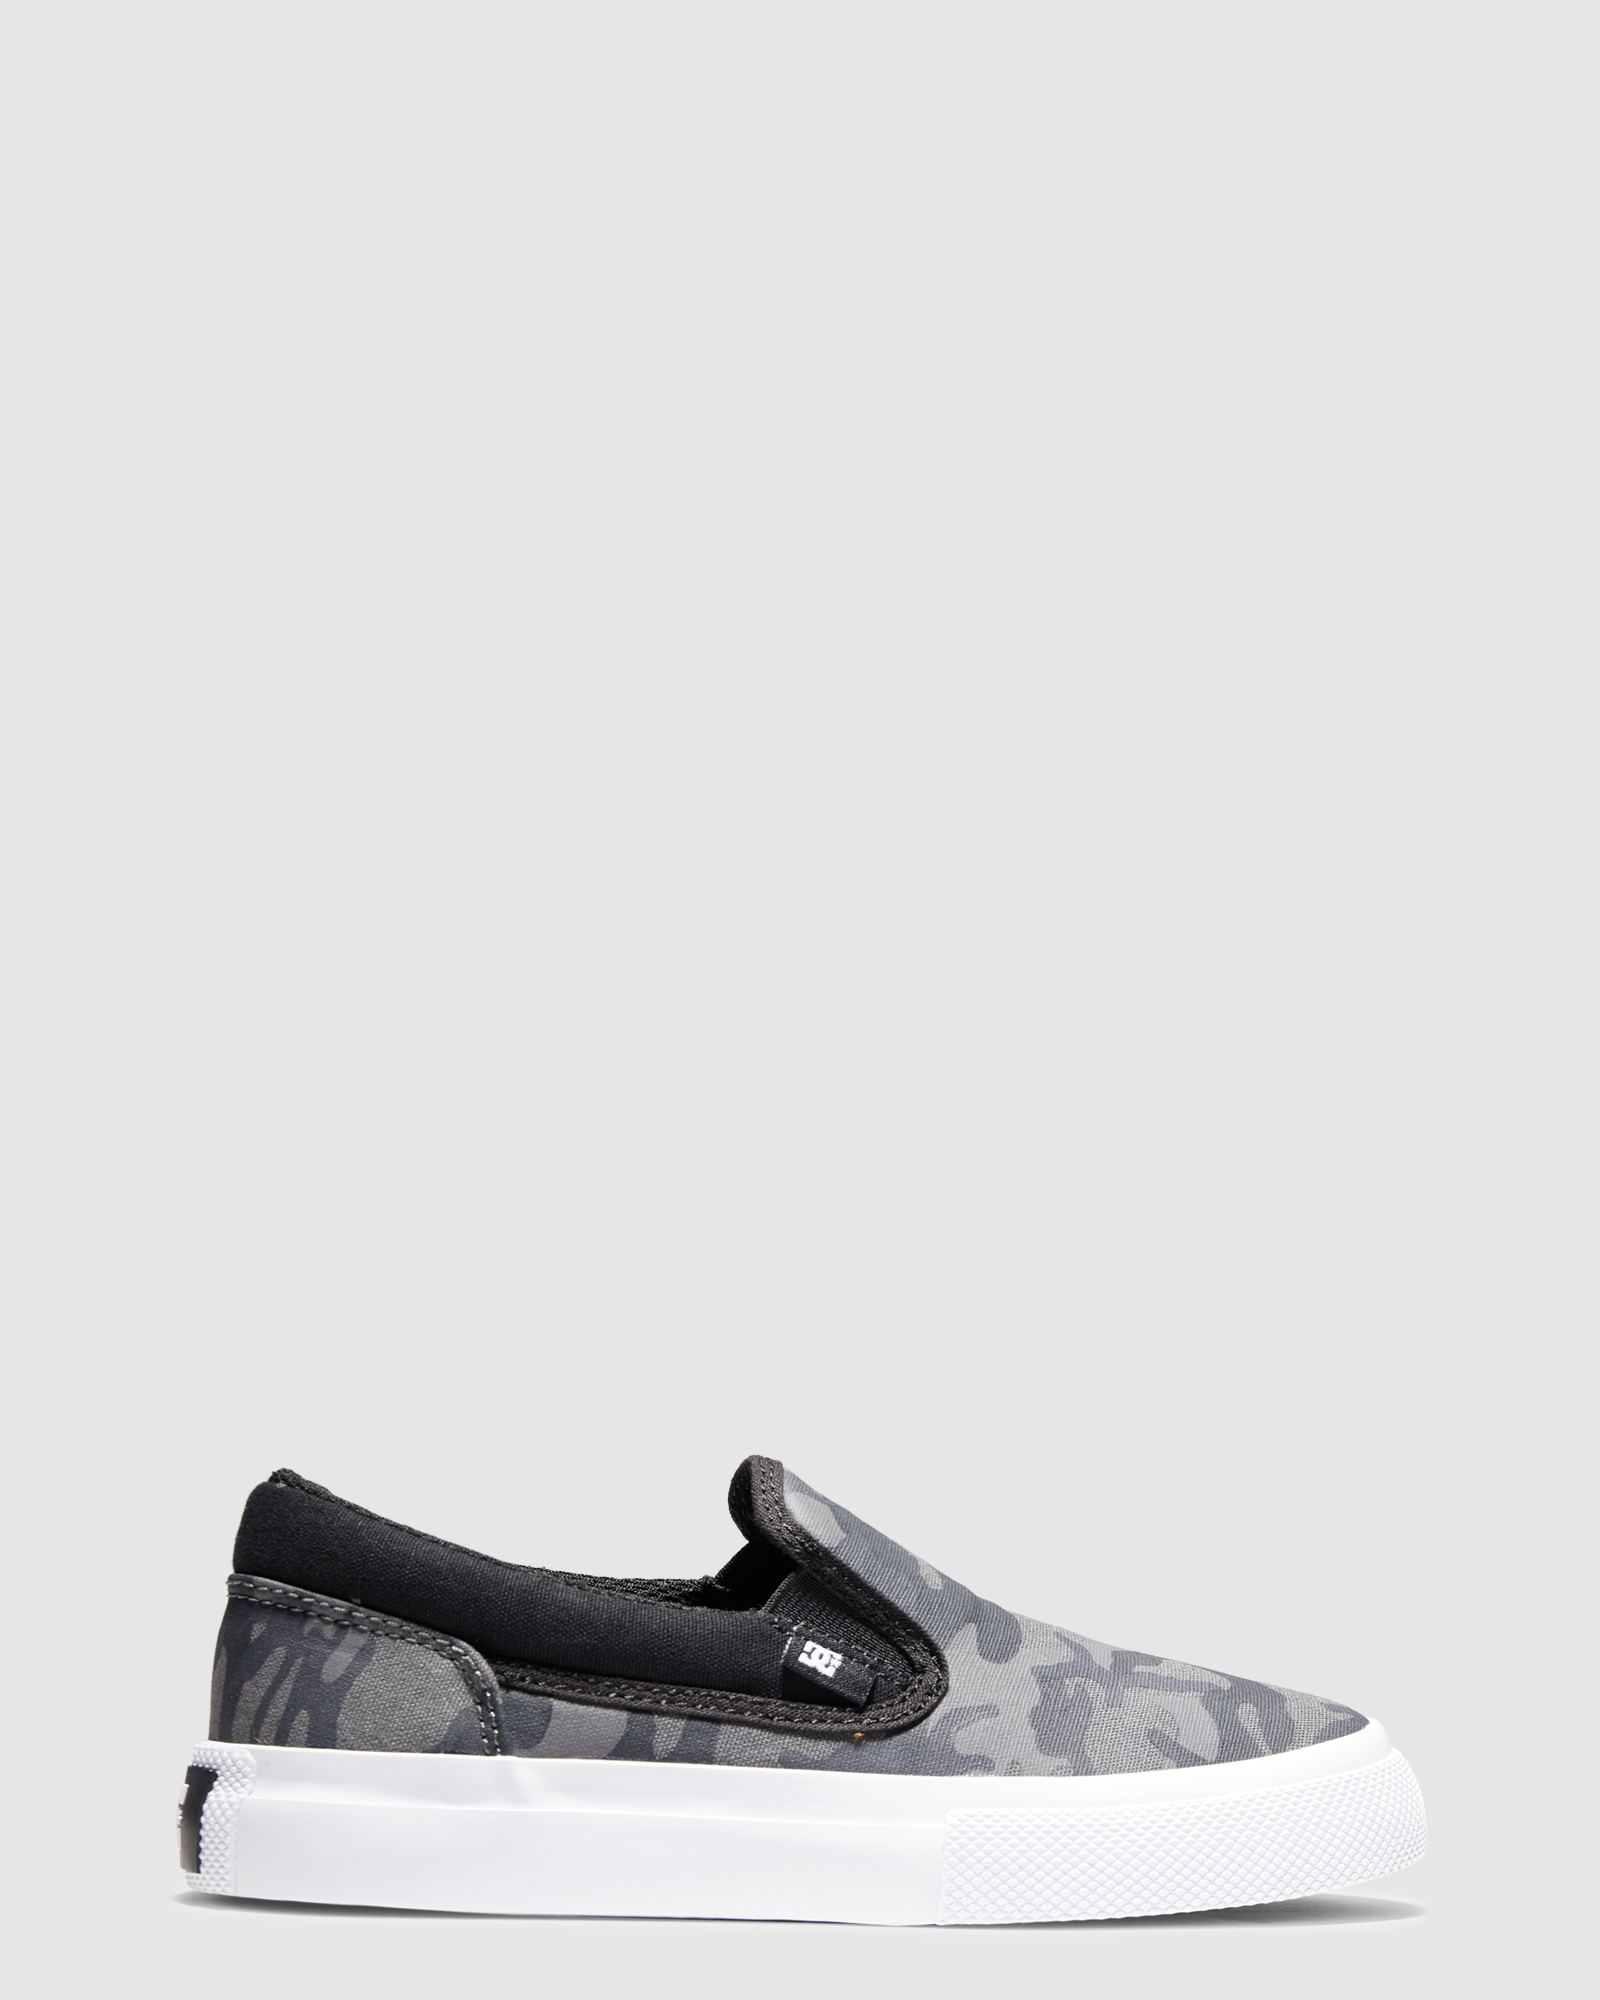 Dc Shoes Manual Slip-On - Black Camouflage | SurfStitch